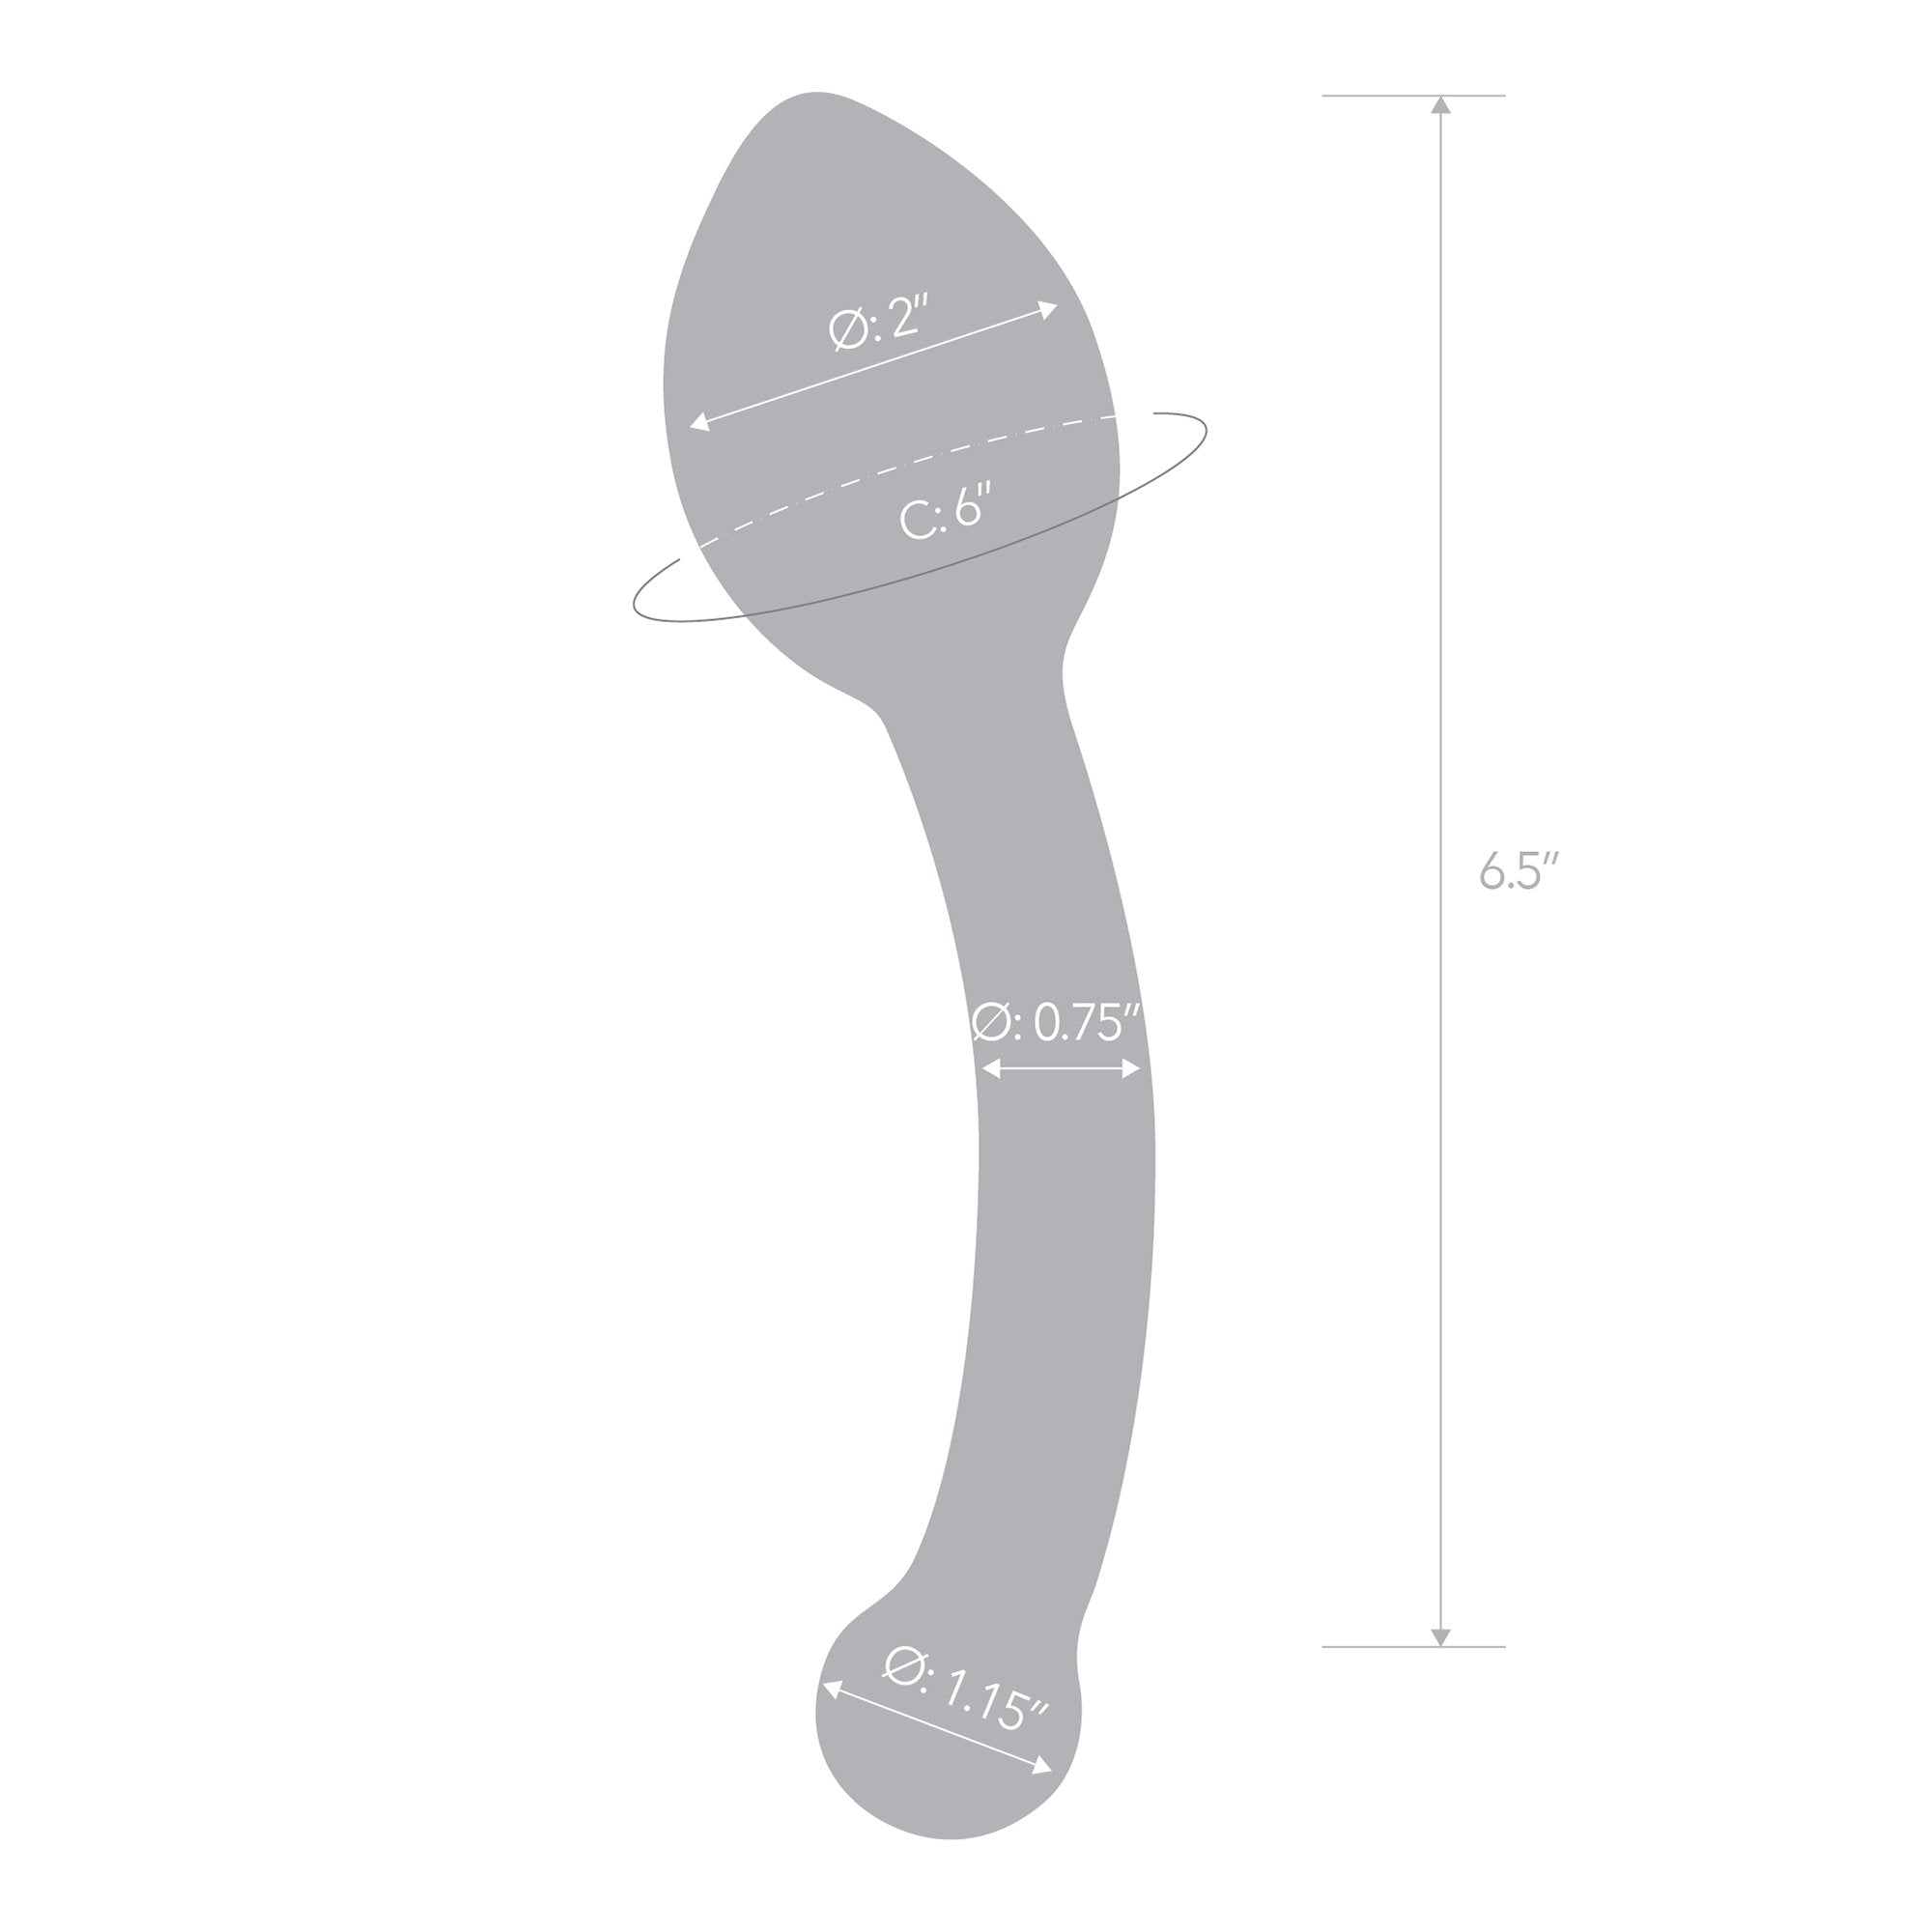 Specifications of the Gläs Pure Indulgence Anal Slider Glass Anal Toy